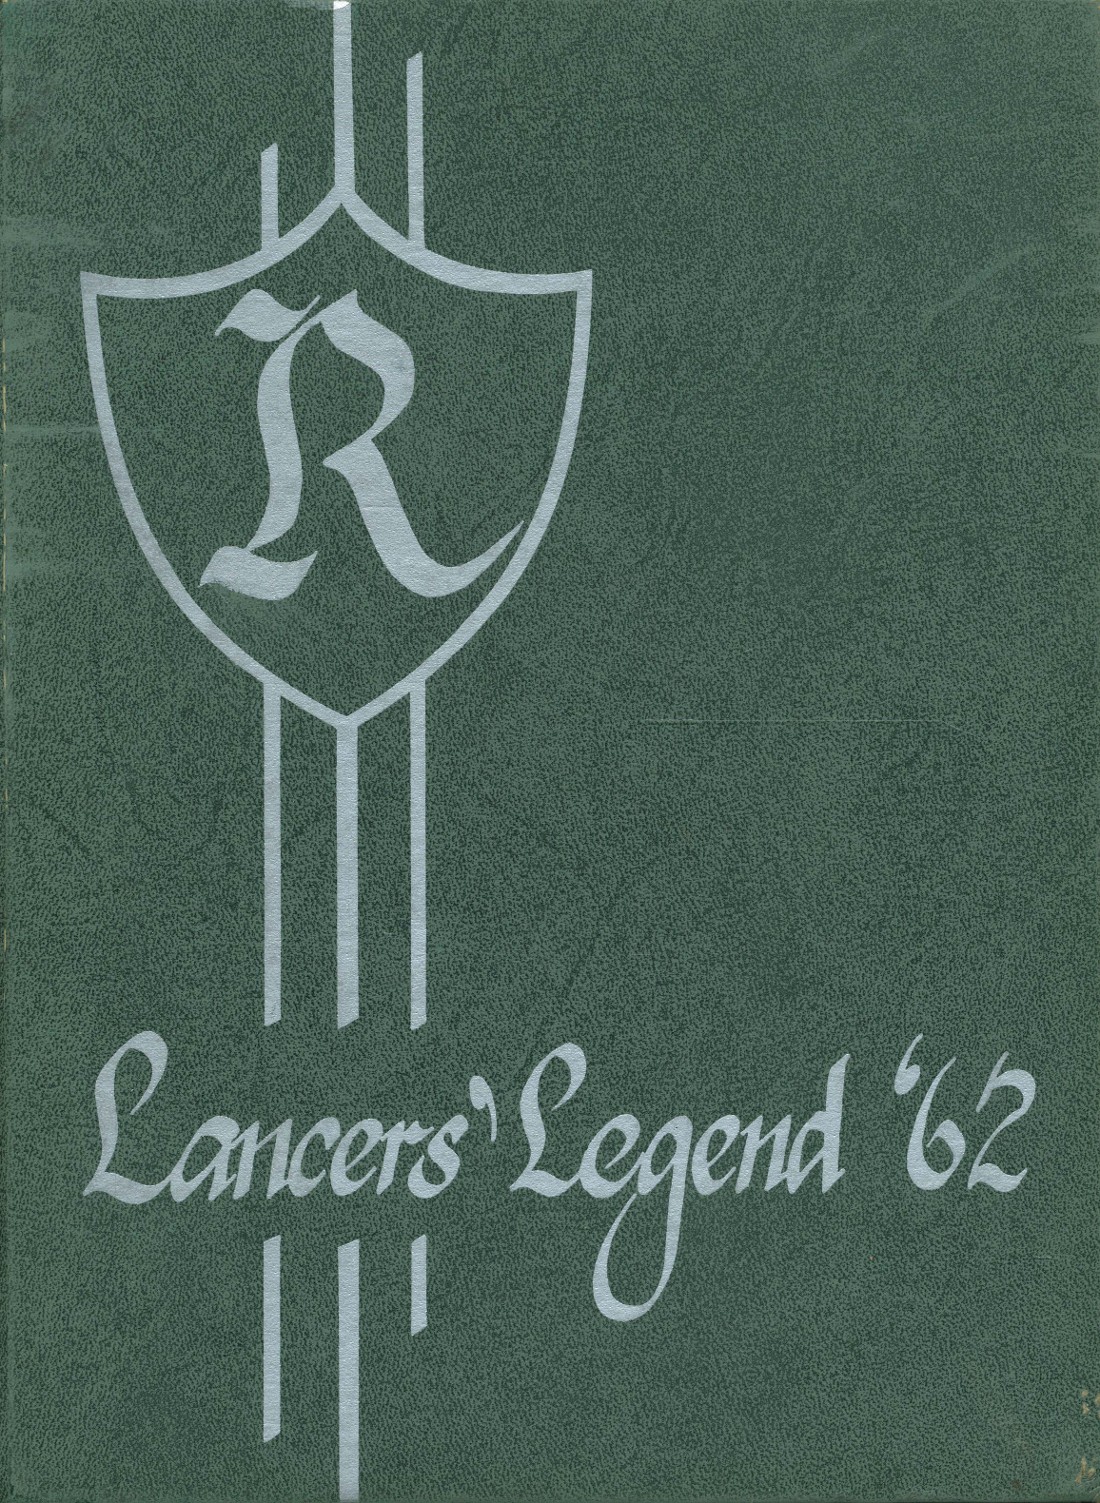 1962 yearbook from Reynolds High School from Troutdale, Oregon for sale